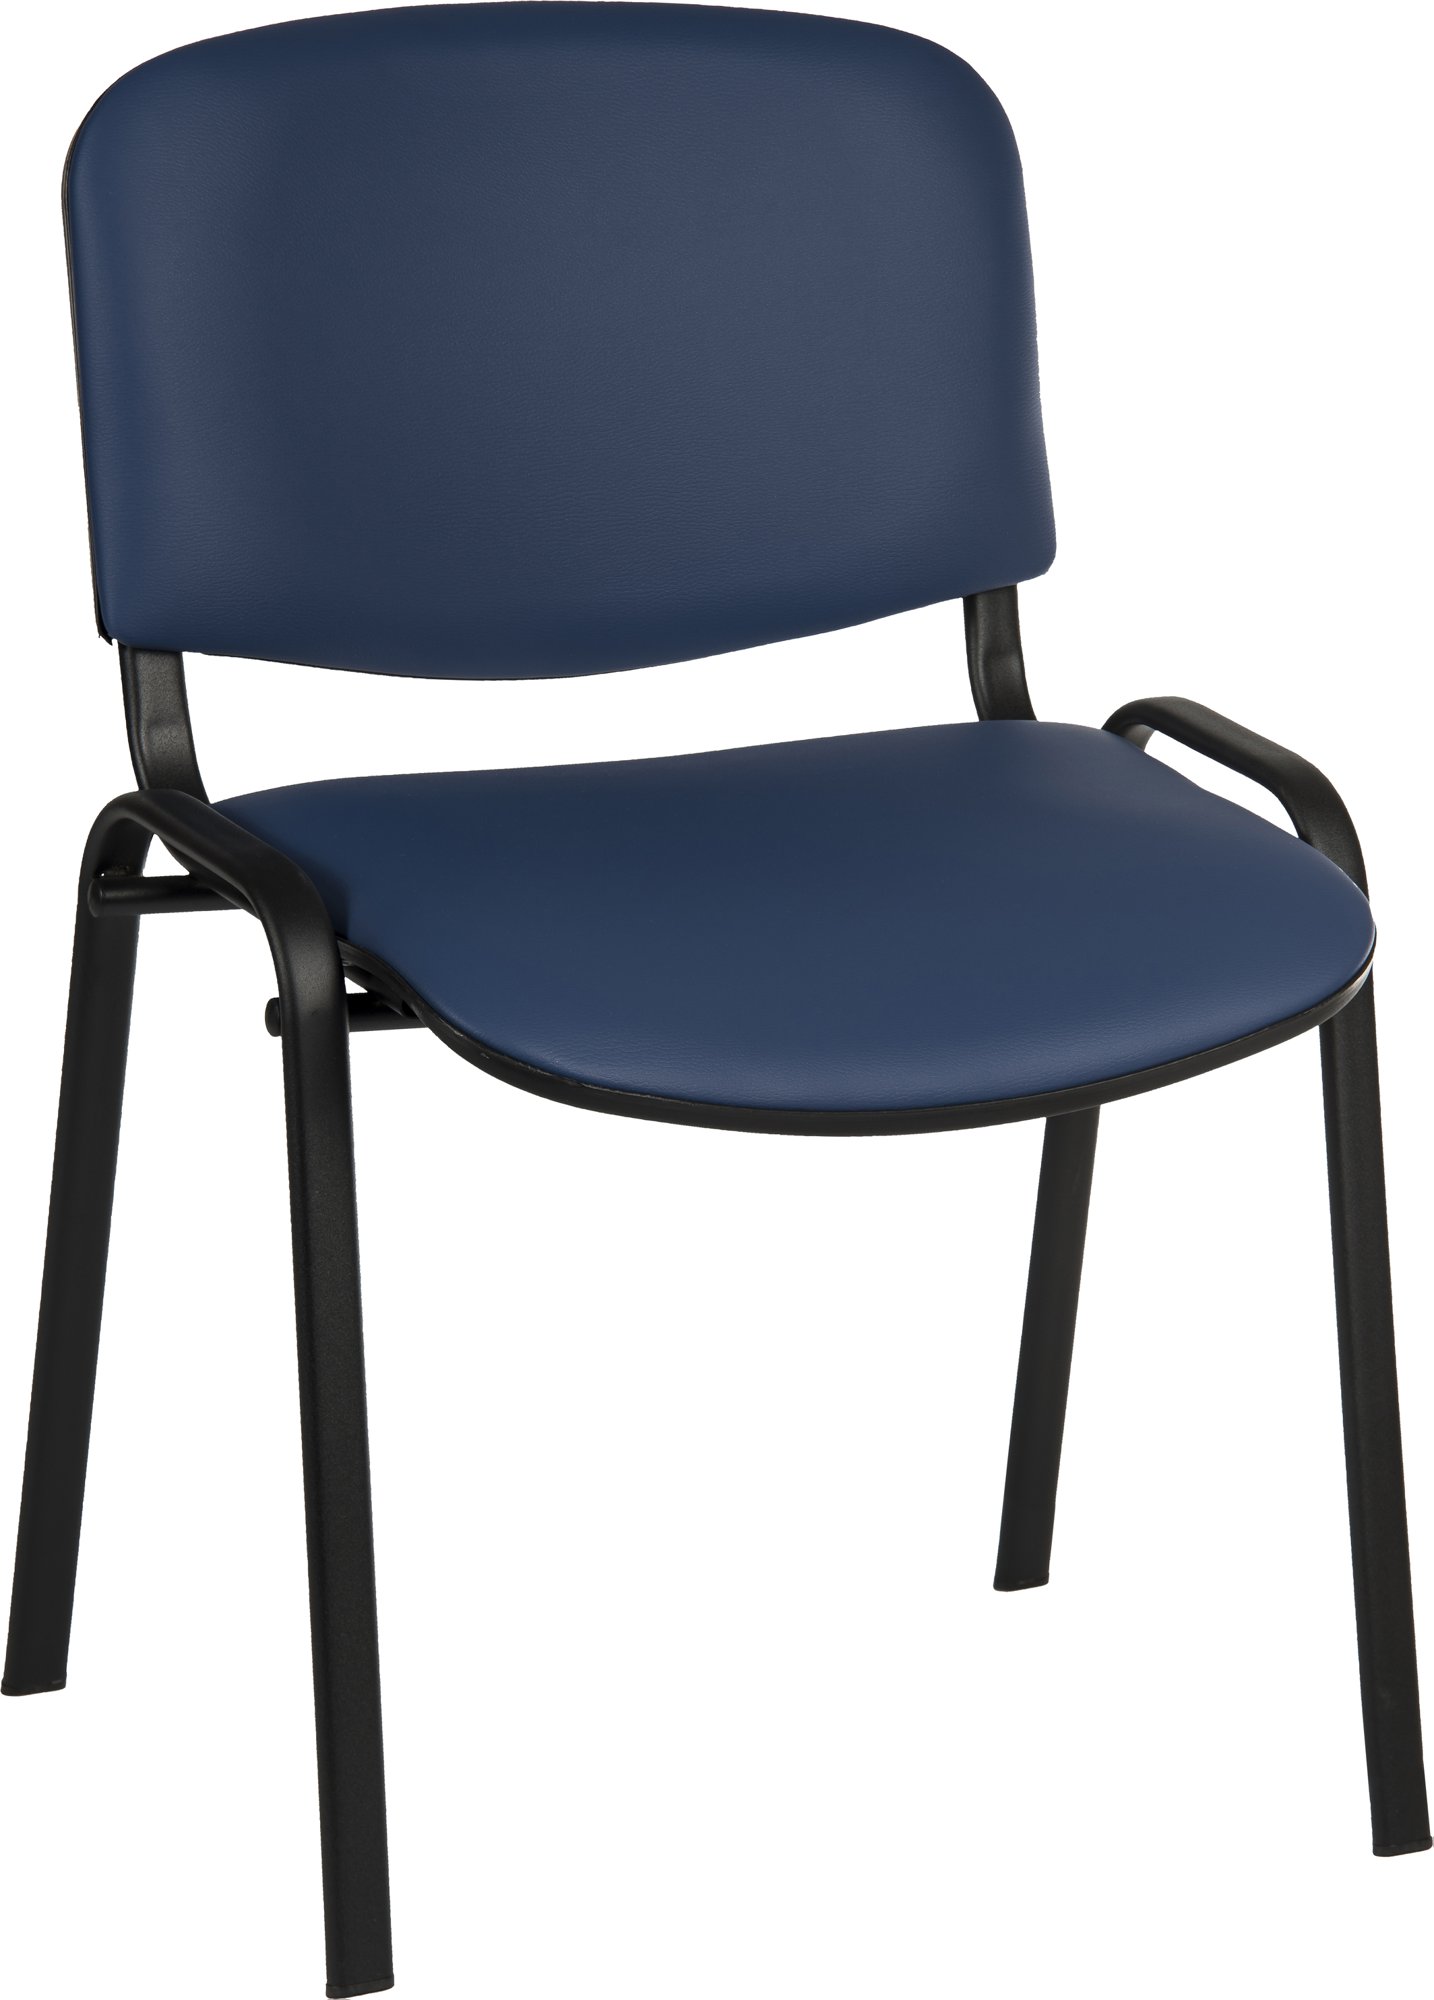 Conference Pu Stackable Chair Blue - 1500PU-BLU -